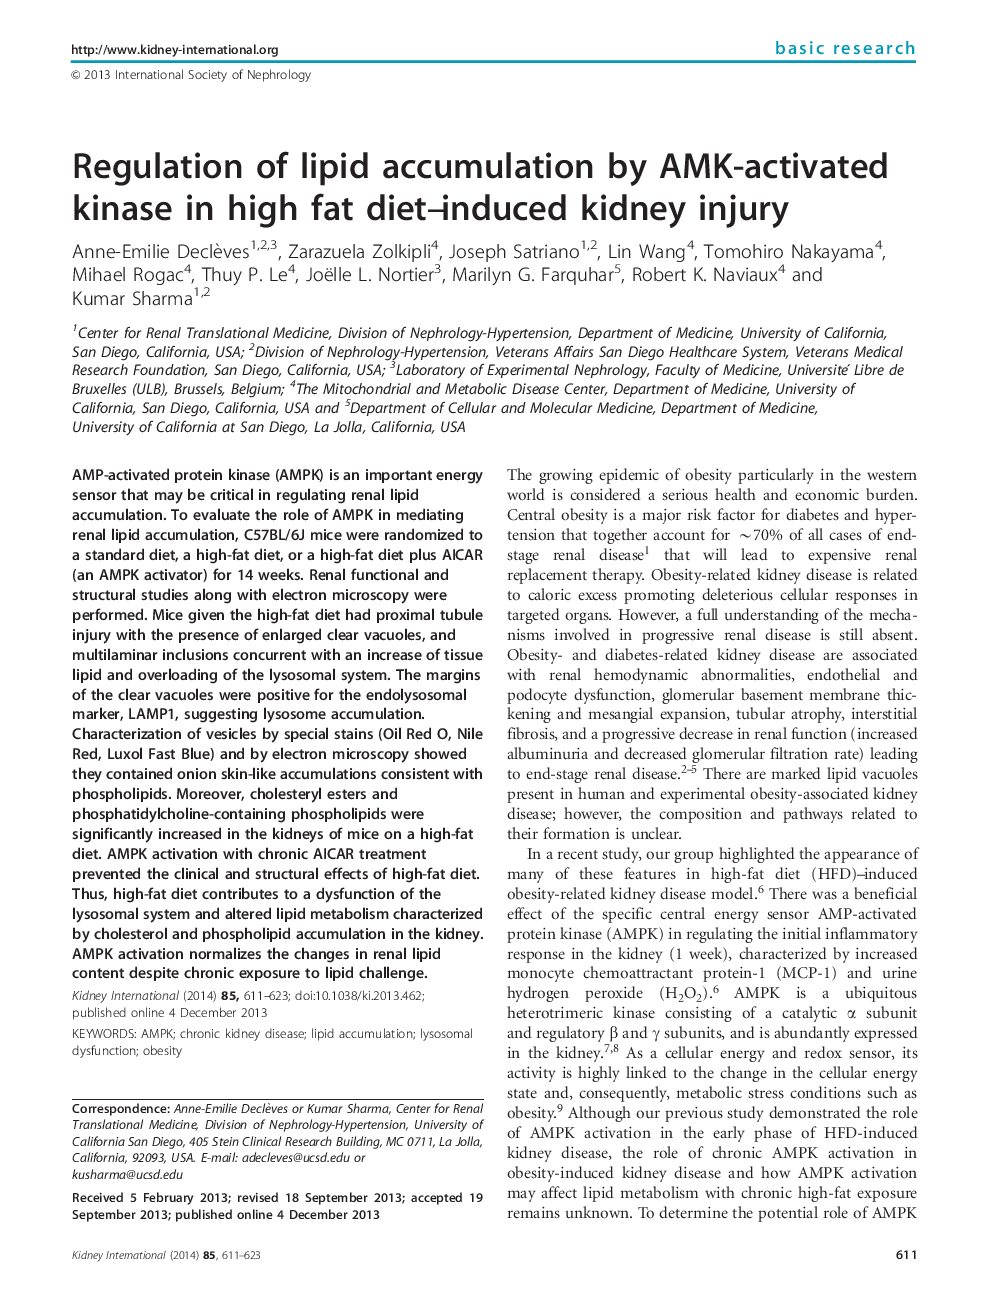 Regulation of lipid accumulation by AMK-activated kinase in high fat diet-induced kidney injury